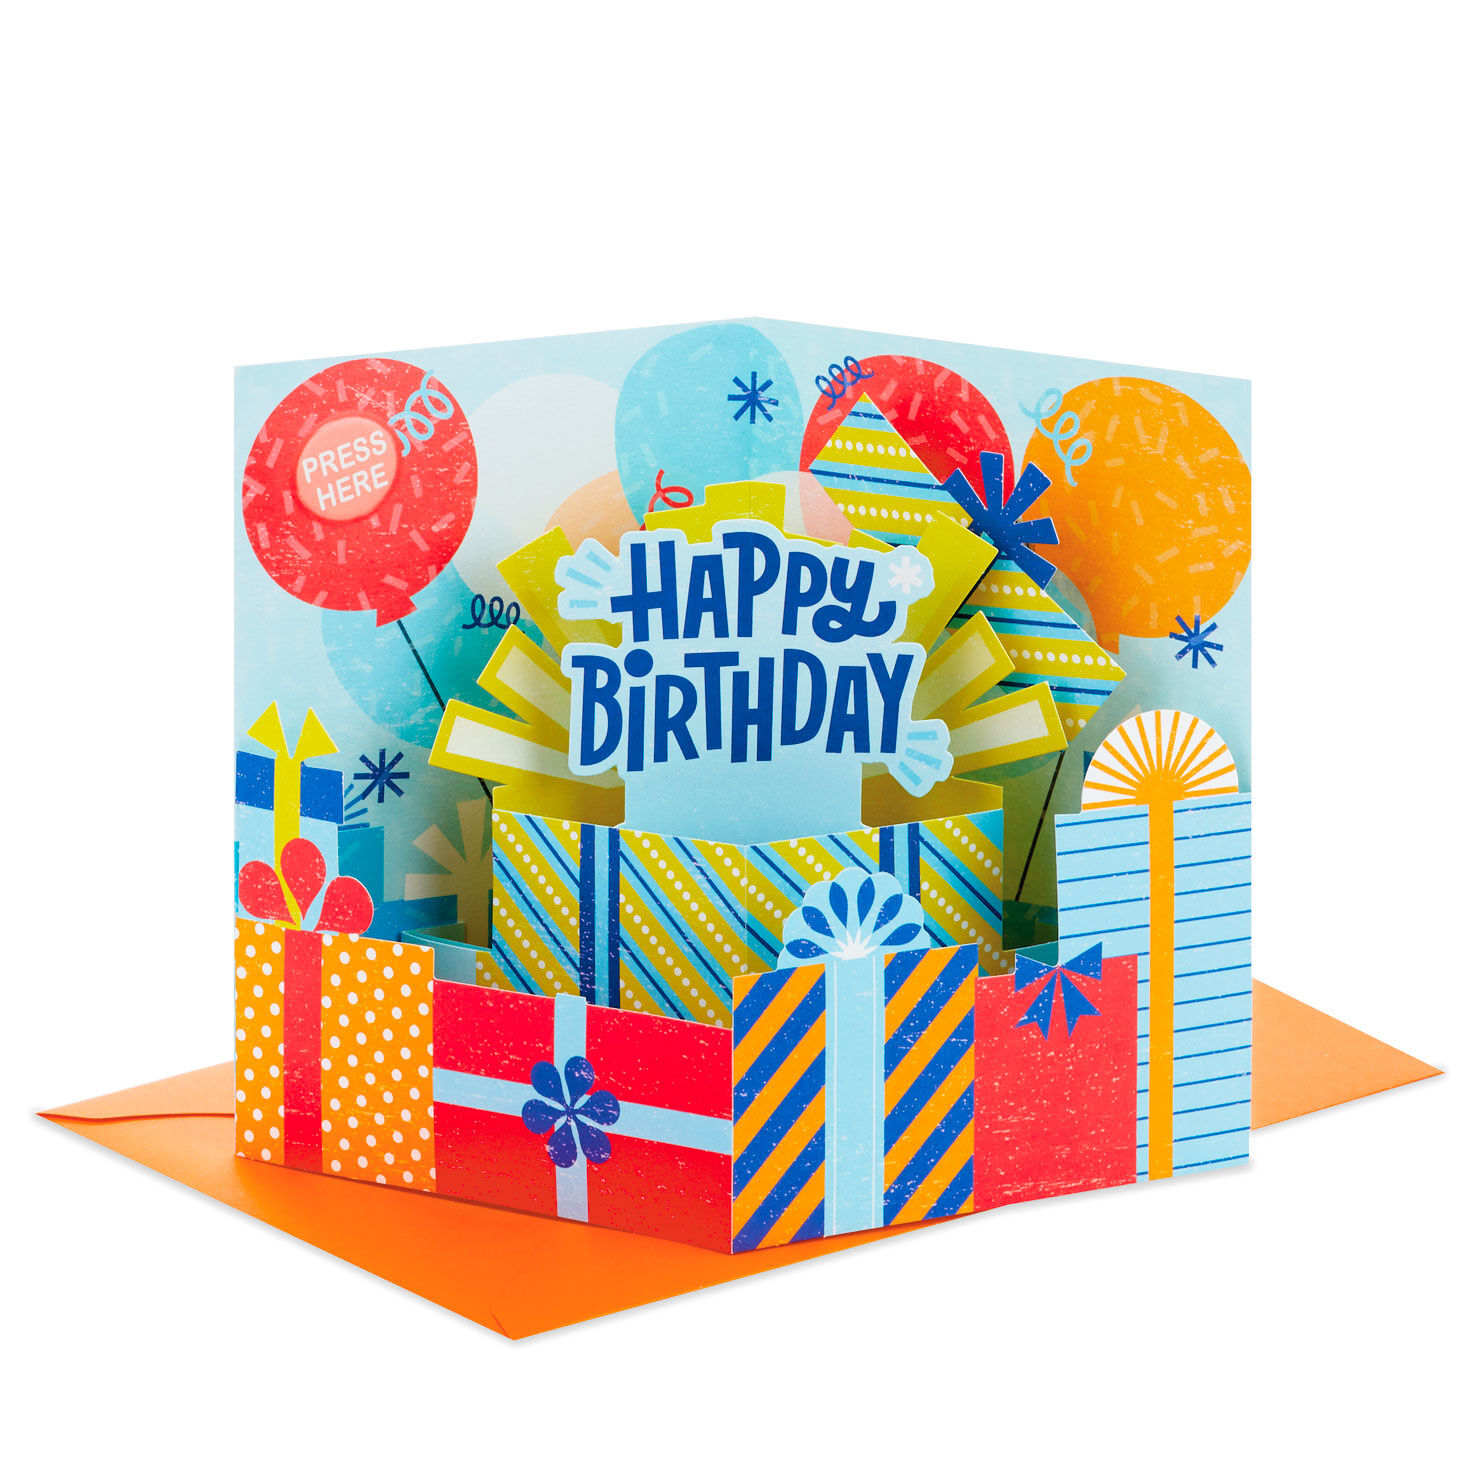 Details about   FRIEND BIRTHDAY Card Fun 3D POP OUT You Only Feel A LITTLE Wrinkly Hallmark PO9 